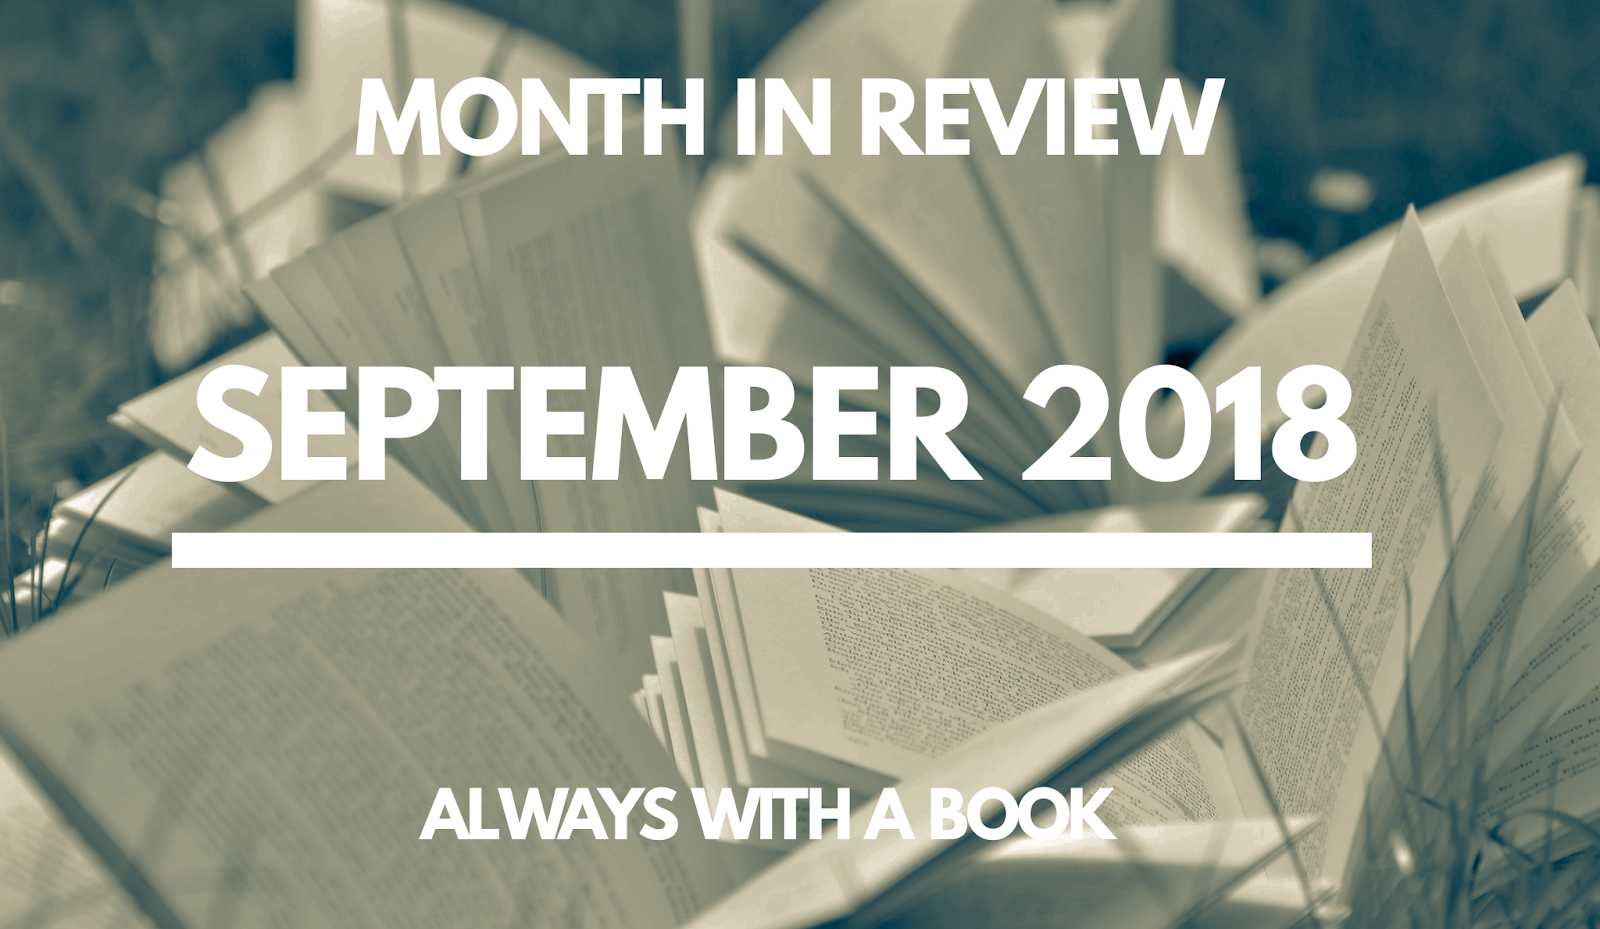 Month in Review: September 2018